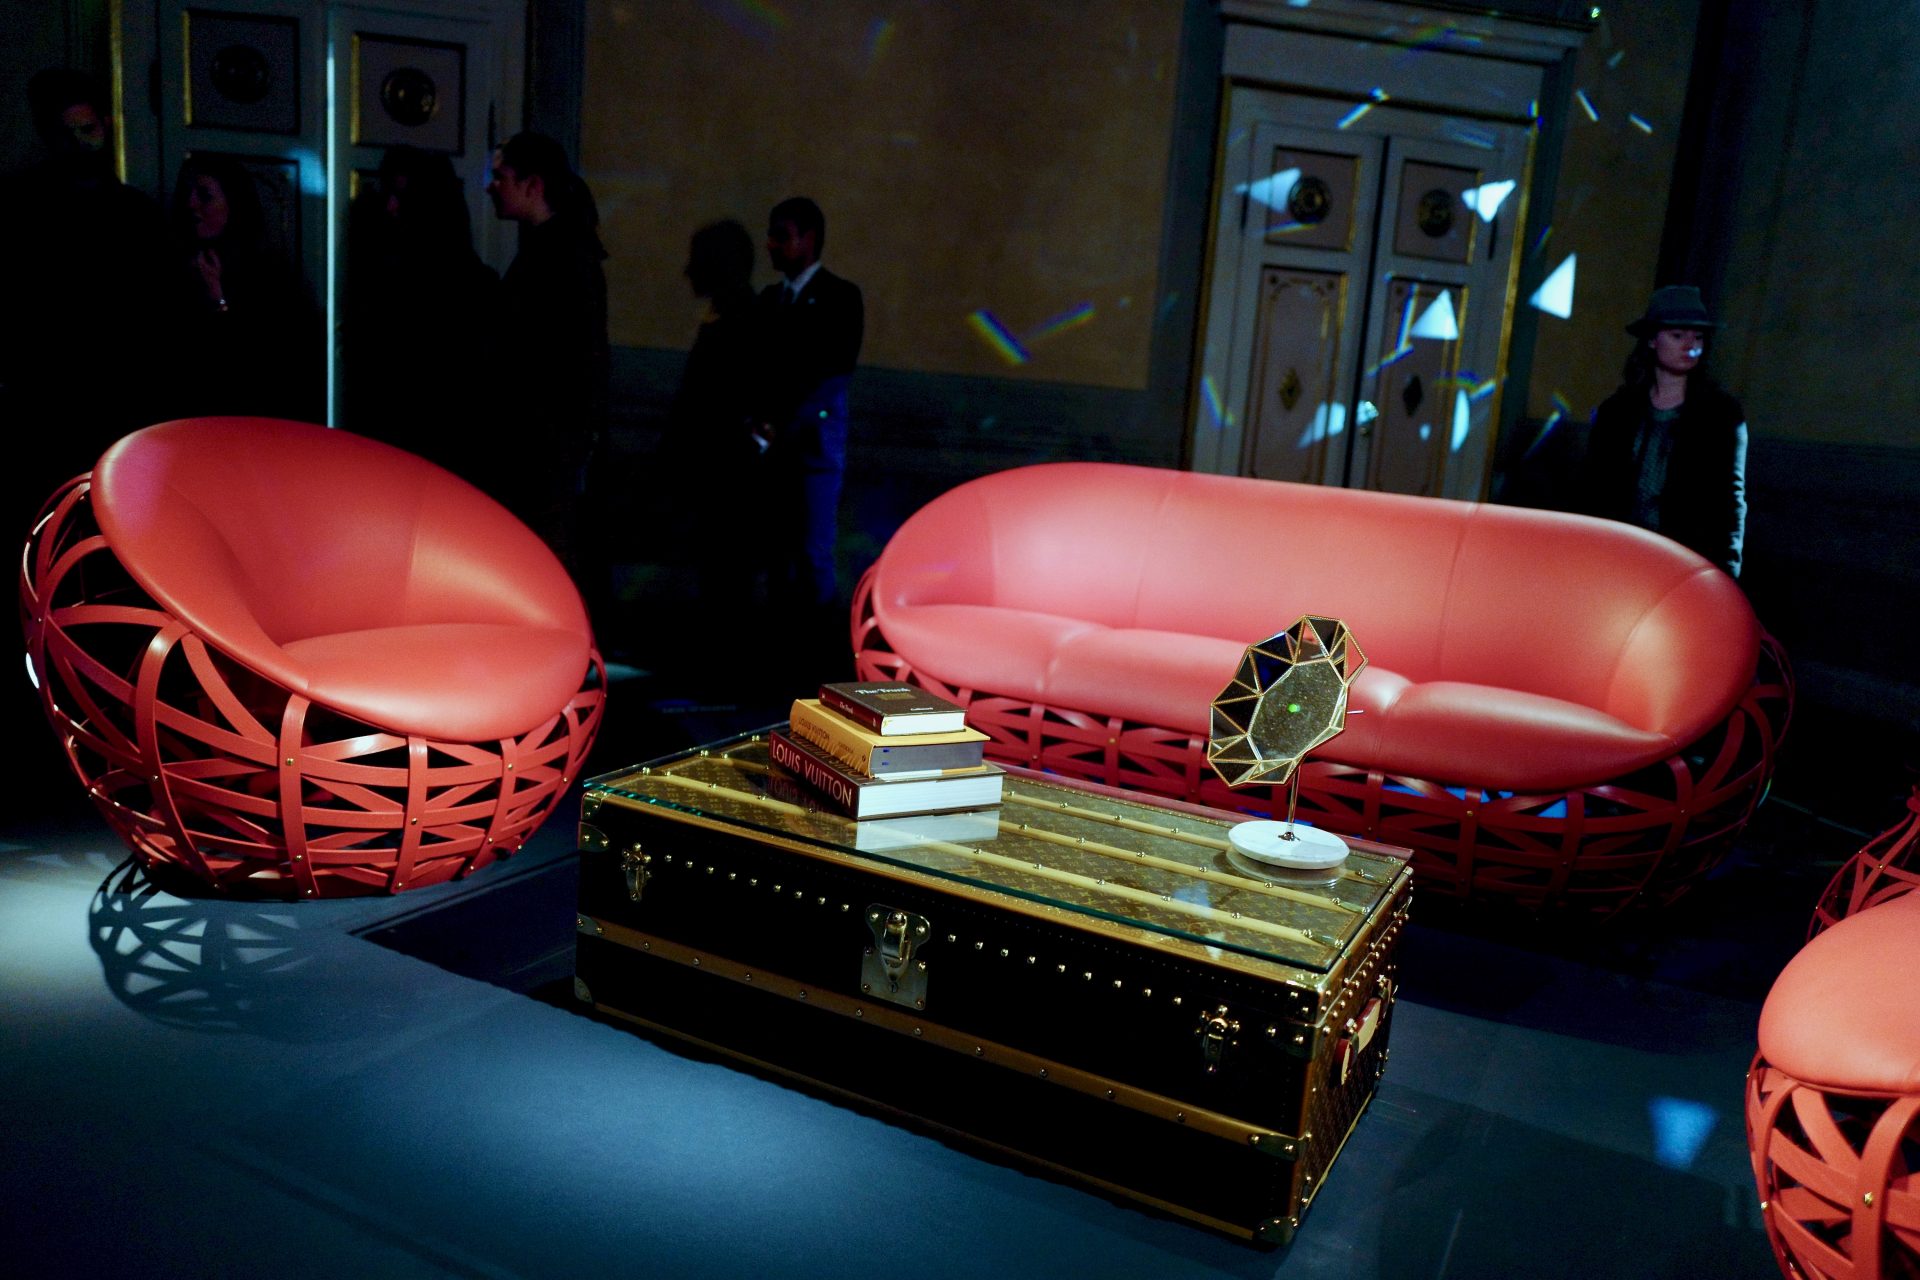 A look inside Louis Vuitton's Objets Nomades Collection Exhibition